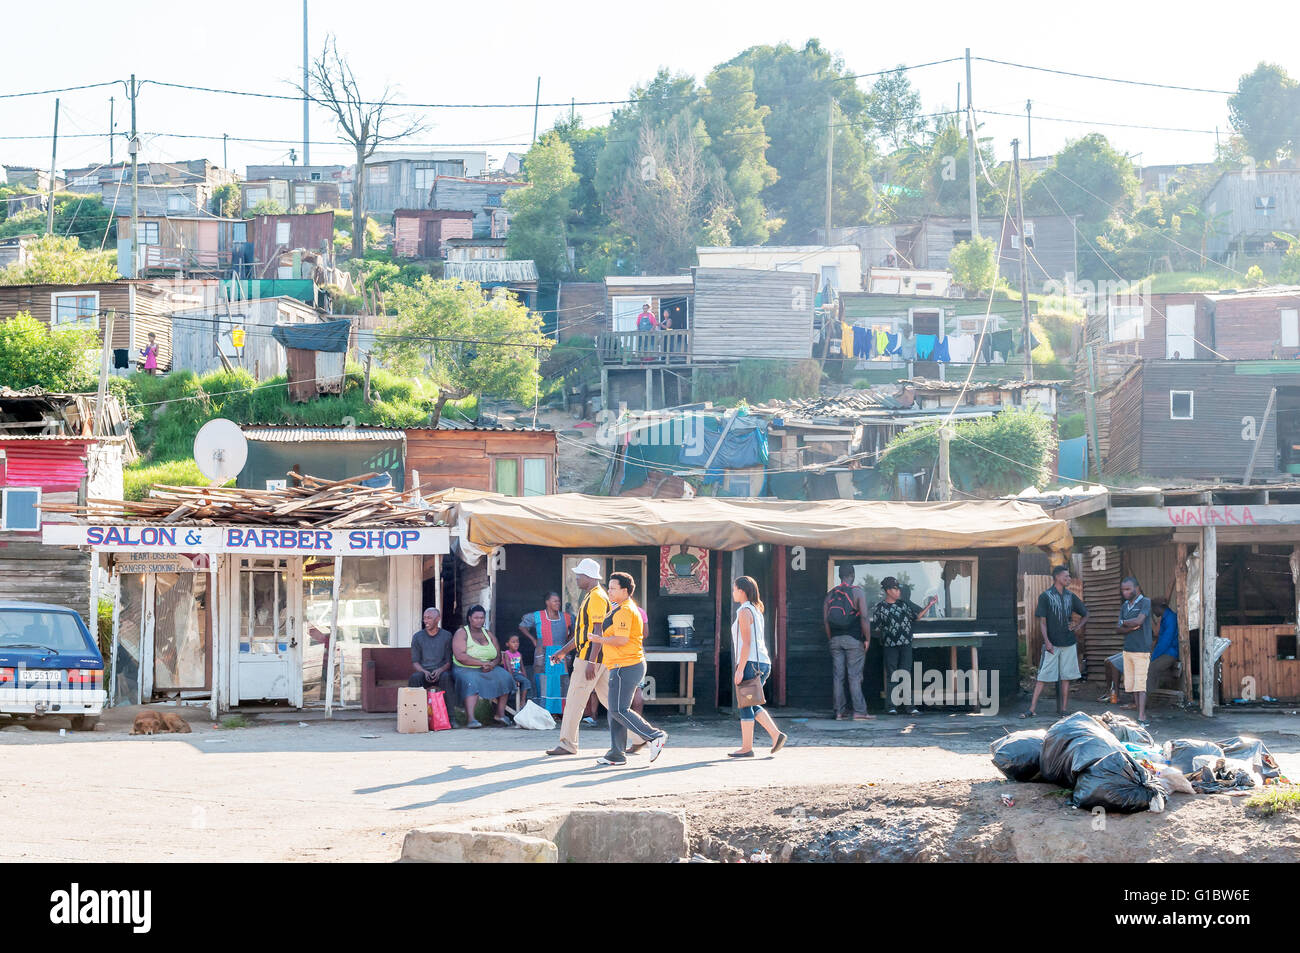 KNYSNA, SOUTH AFRICA - MARCH 5, 2016: Unidentified people in an morning scene of shacks and informal businesses in a township Stock Photo